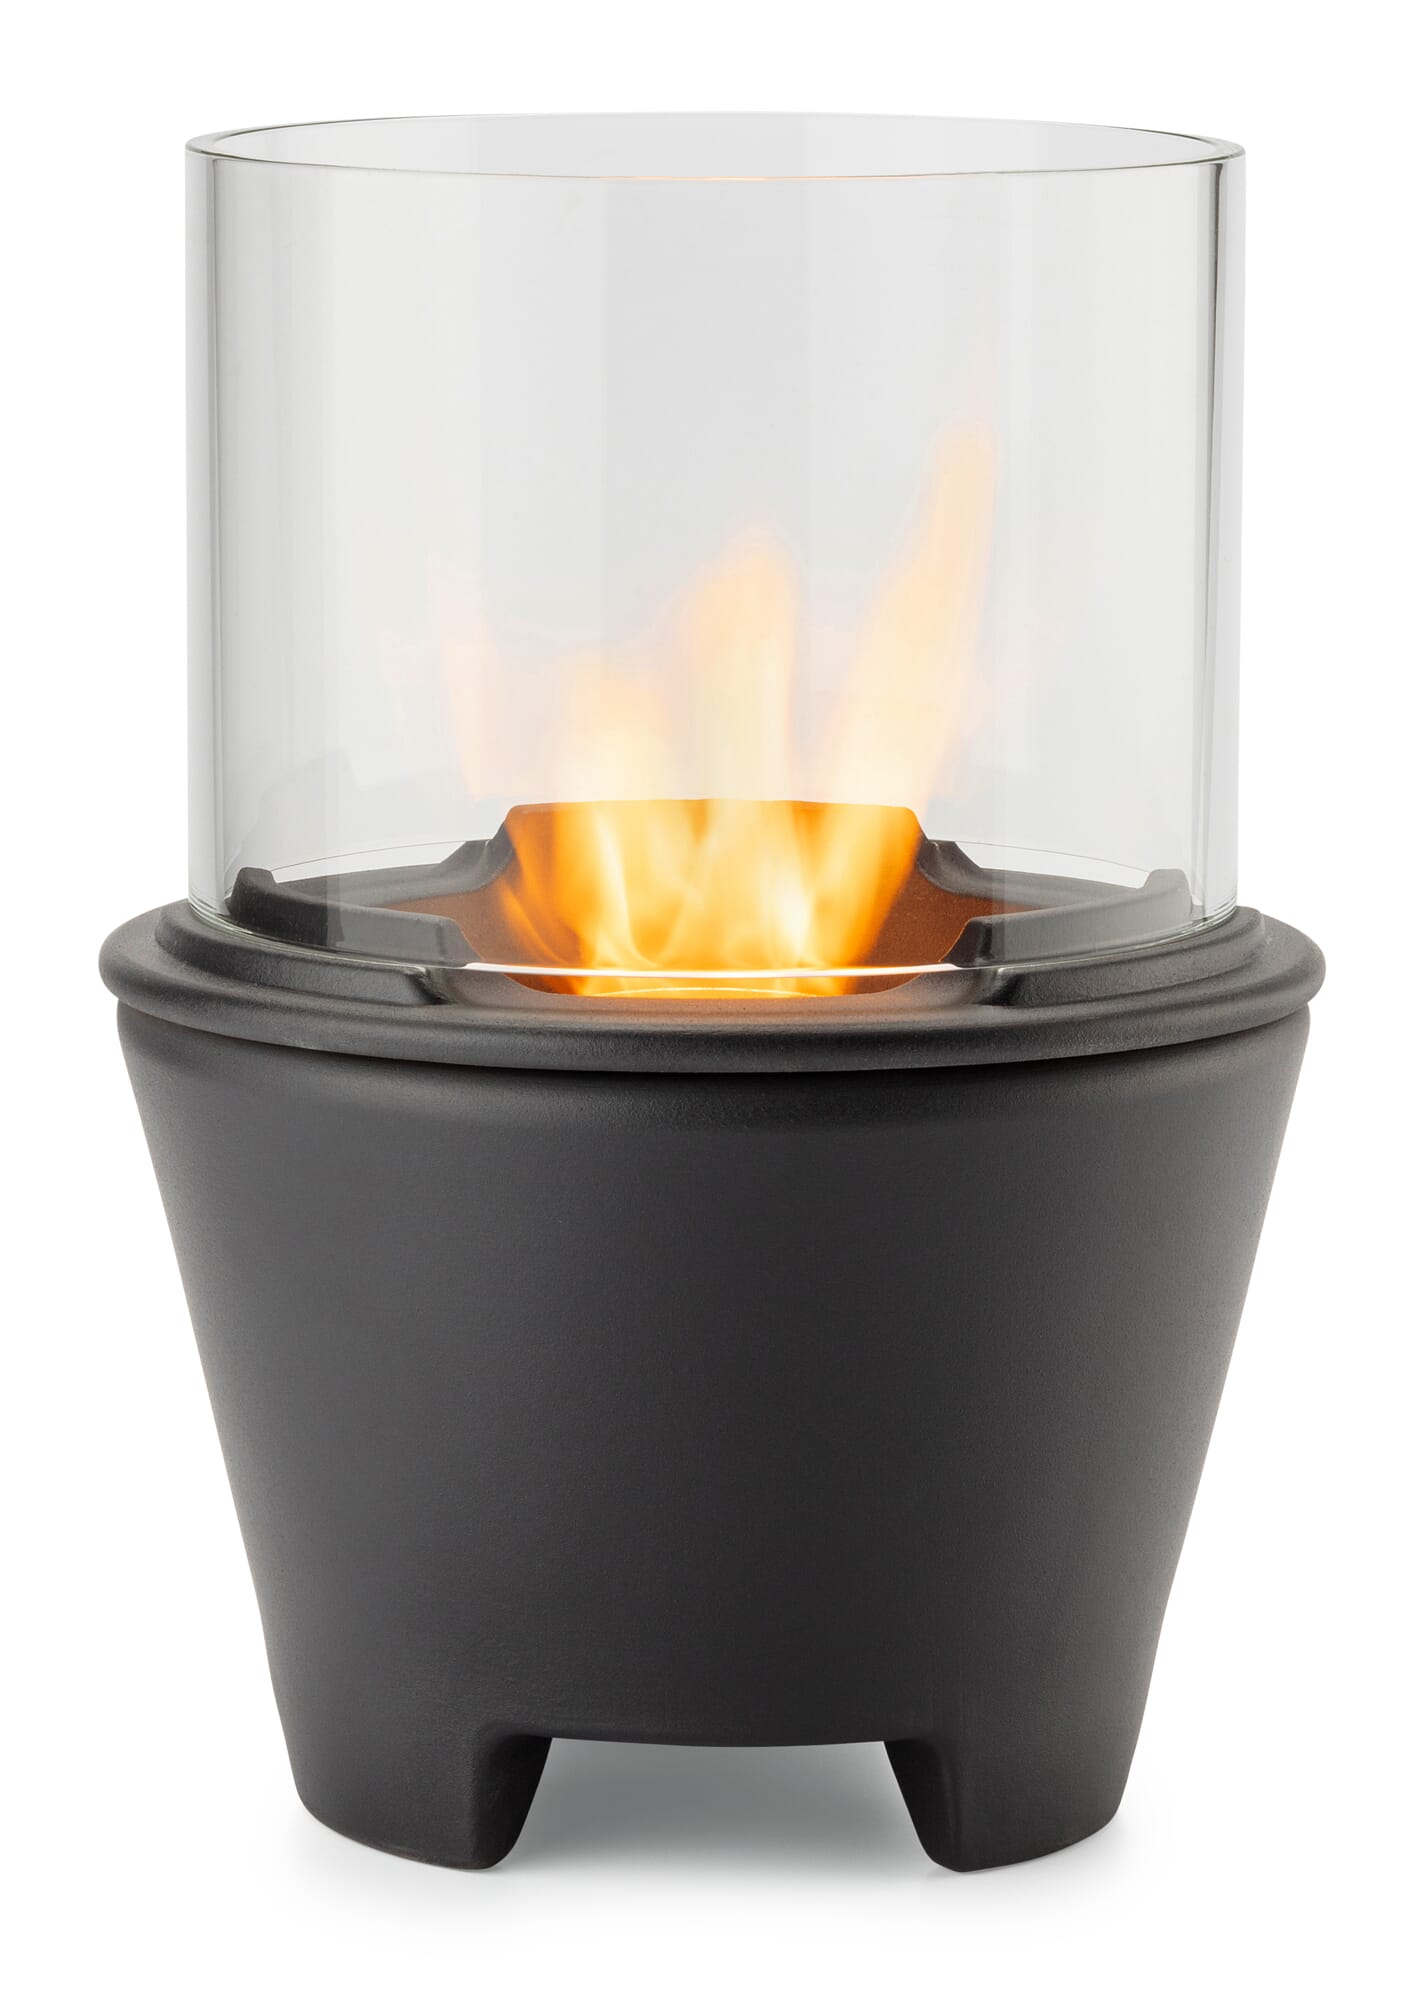 Denk Keramik Glass Attachment for the Camping Wax Burner